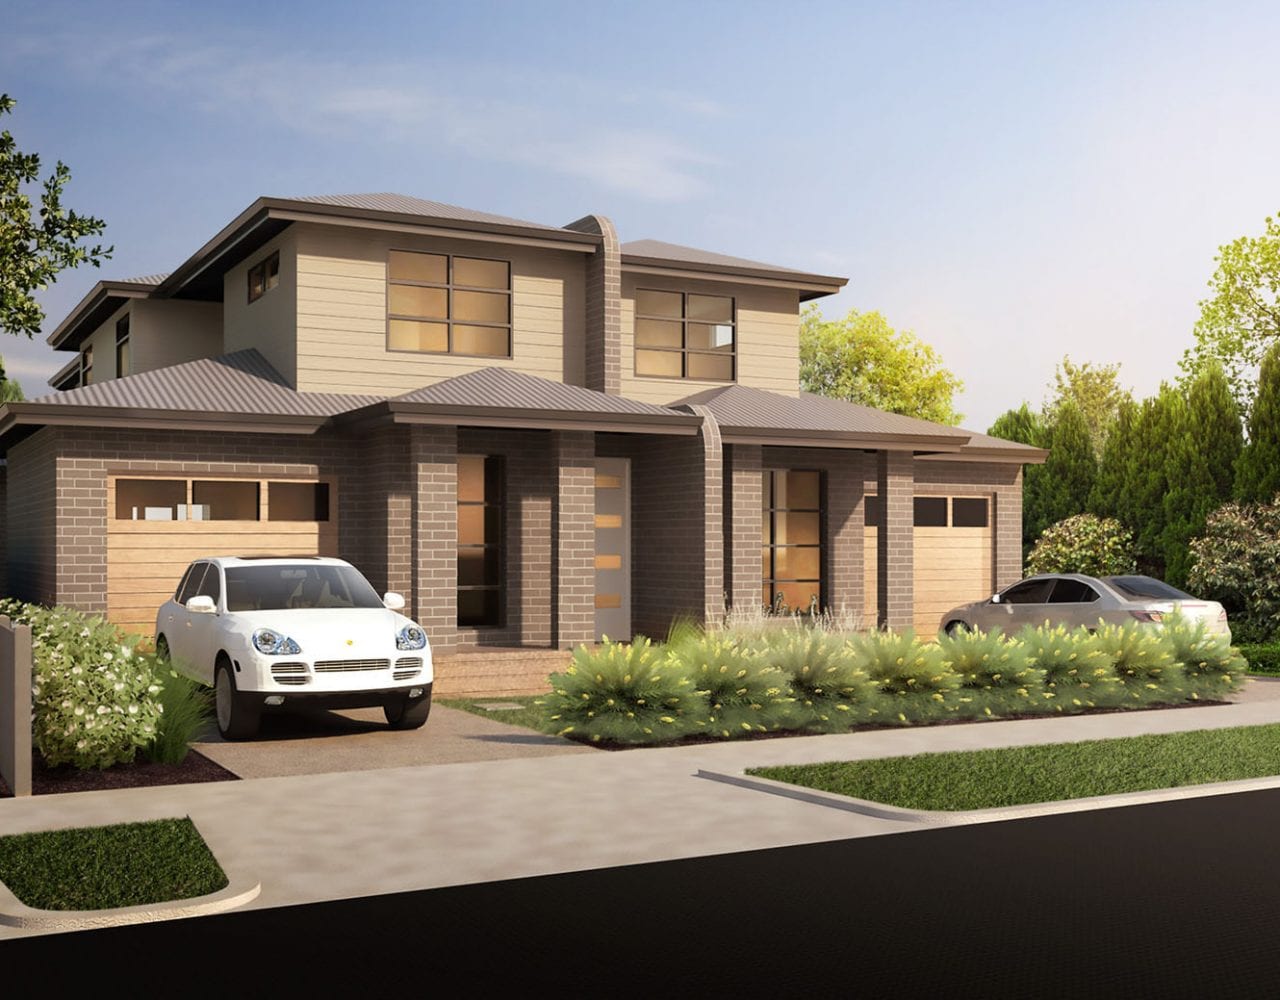 Exterior view of custom dual occupancy home with car parking outside at Darley